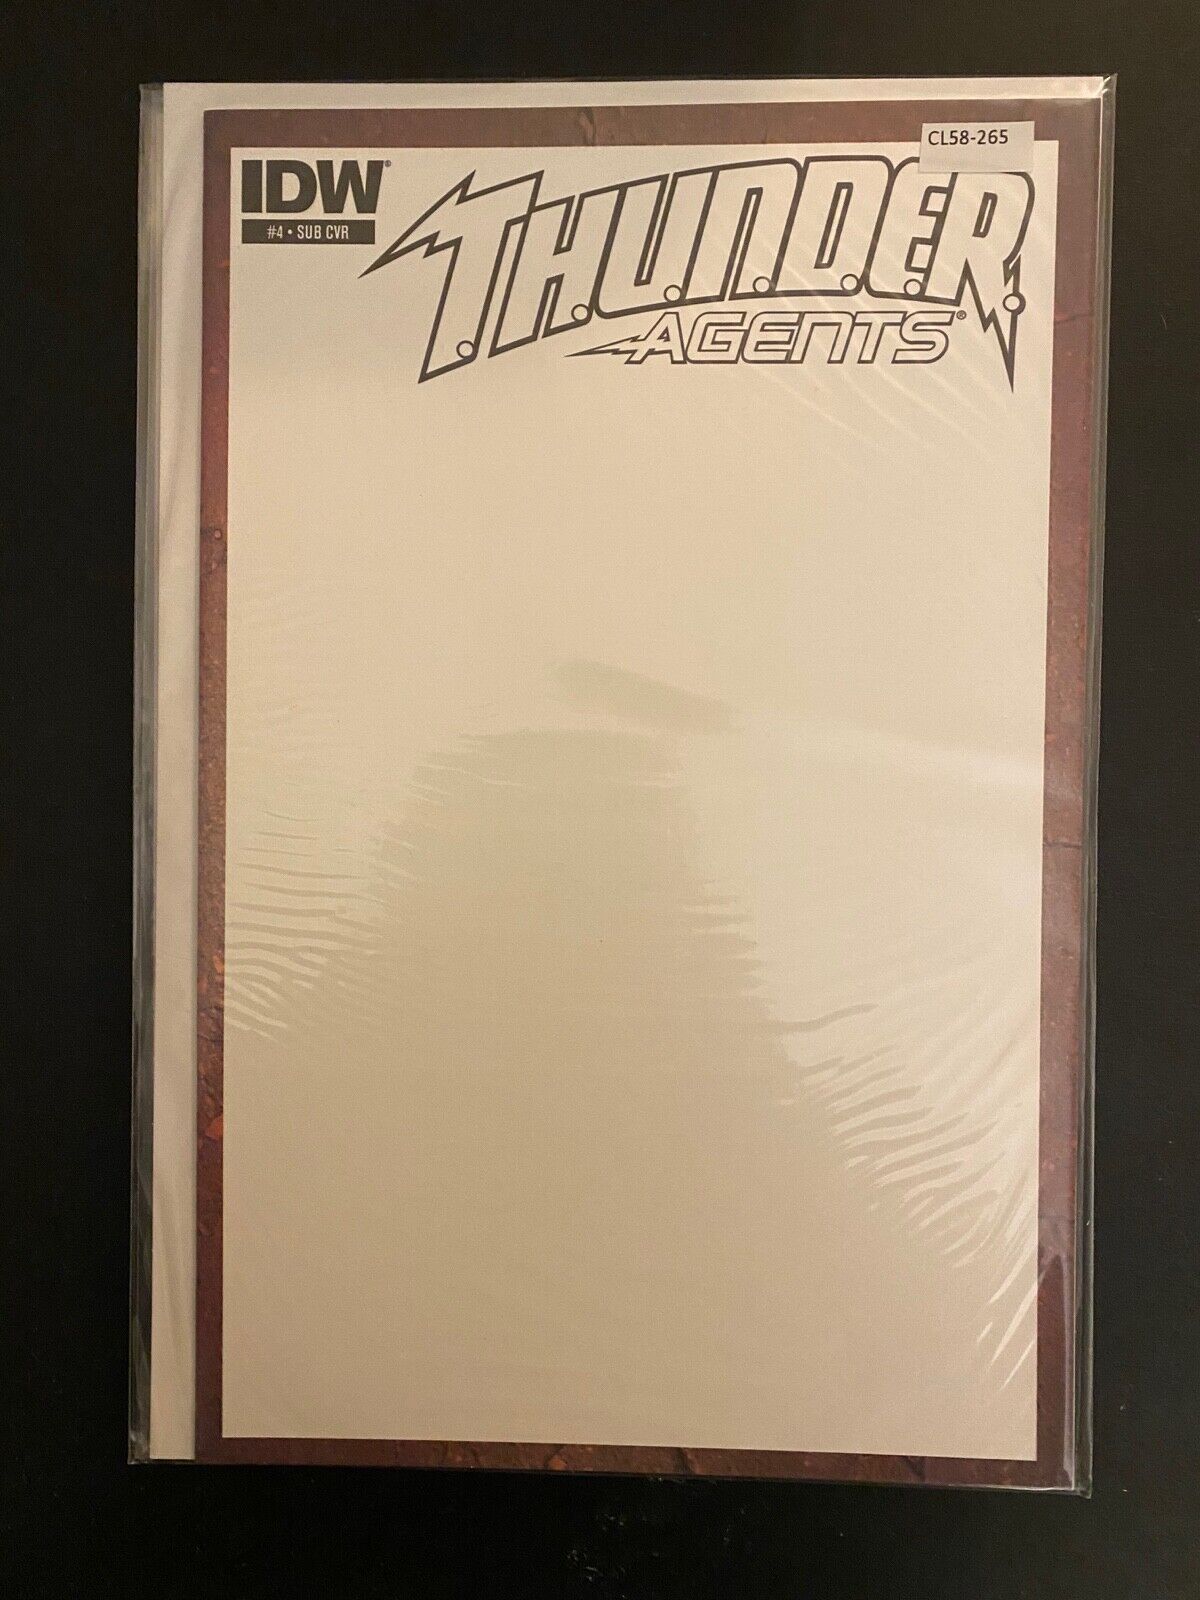 Thunder Agents 4 Sketch Cover Variant High Grade IDW Comic Book CL58-265